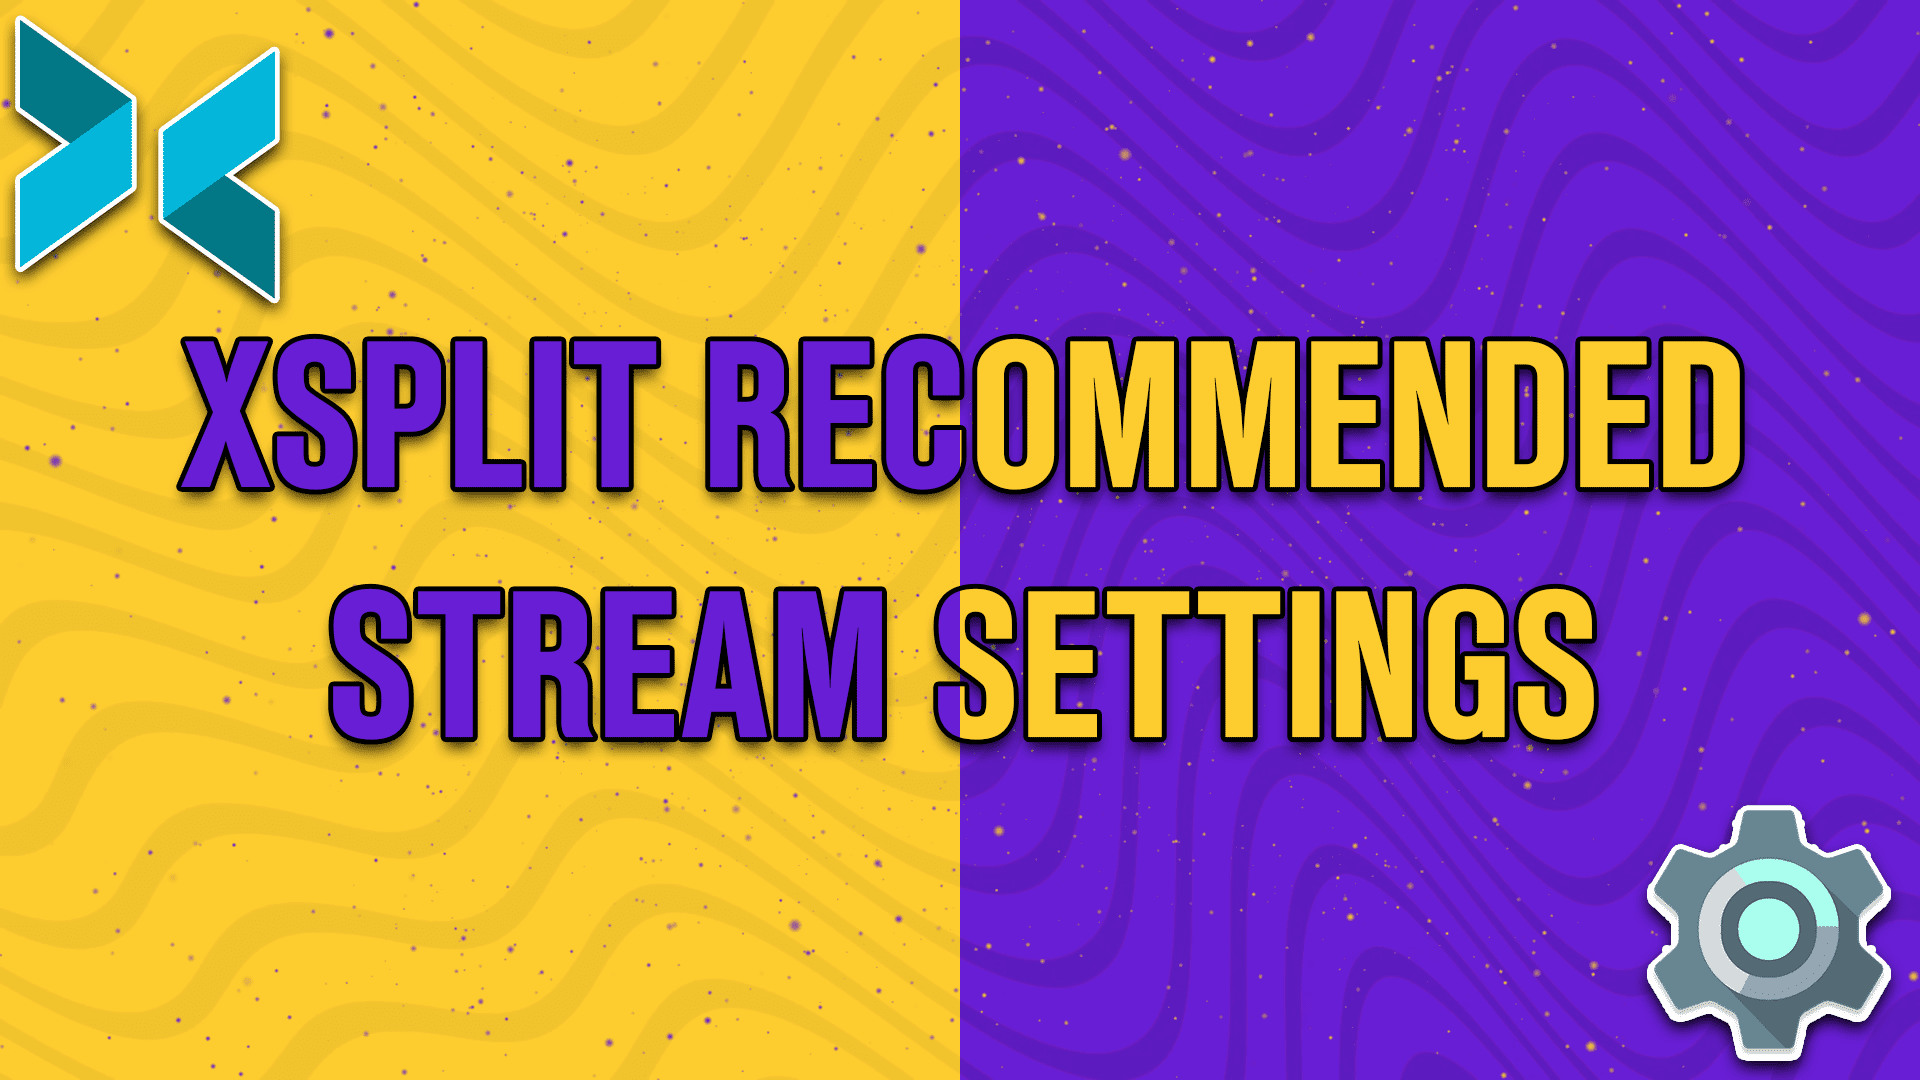 xsplit recommended stream settings - StreamBee